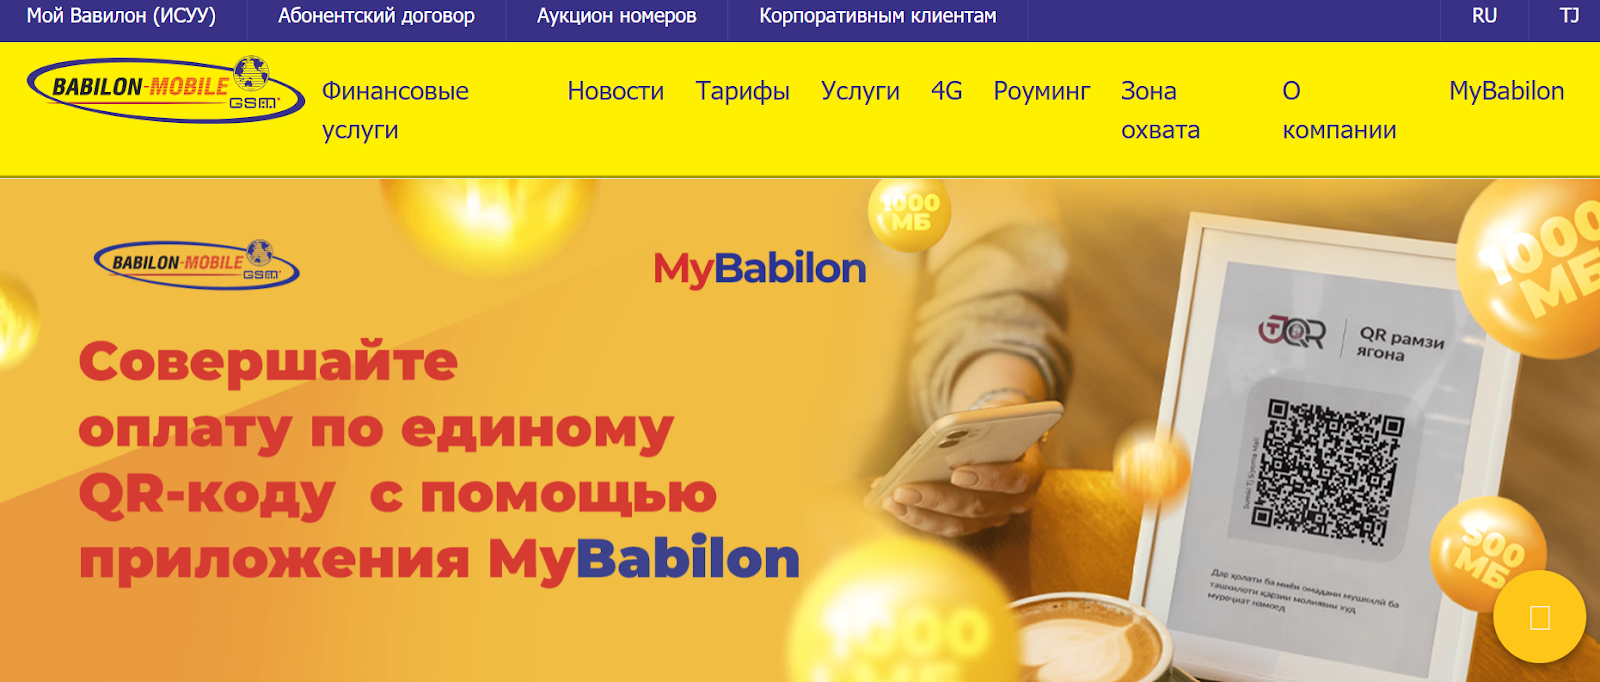 Babilon-Mobile website snapshot highlighting the services it offers.